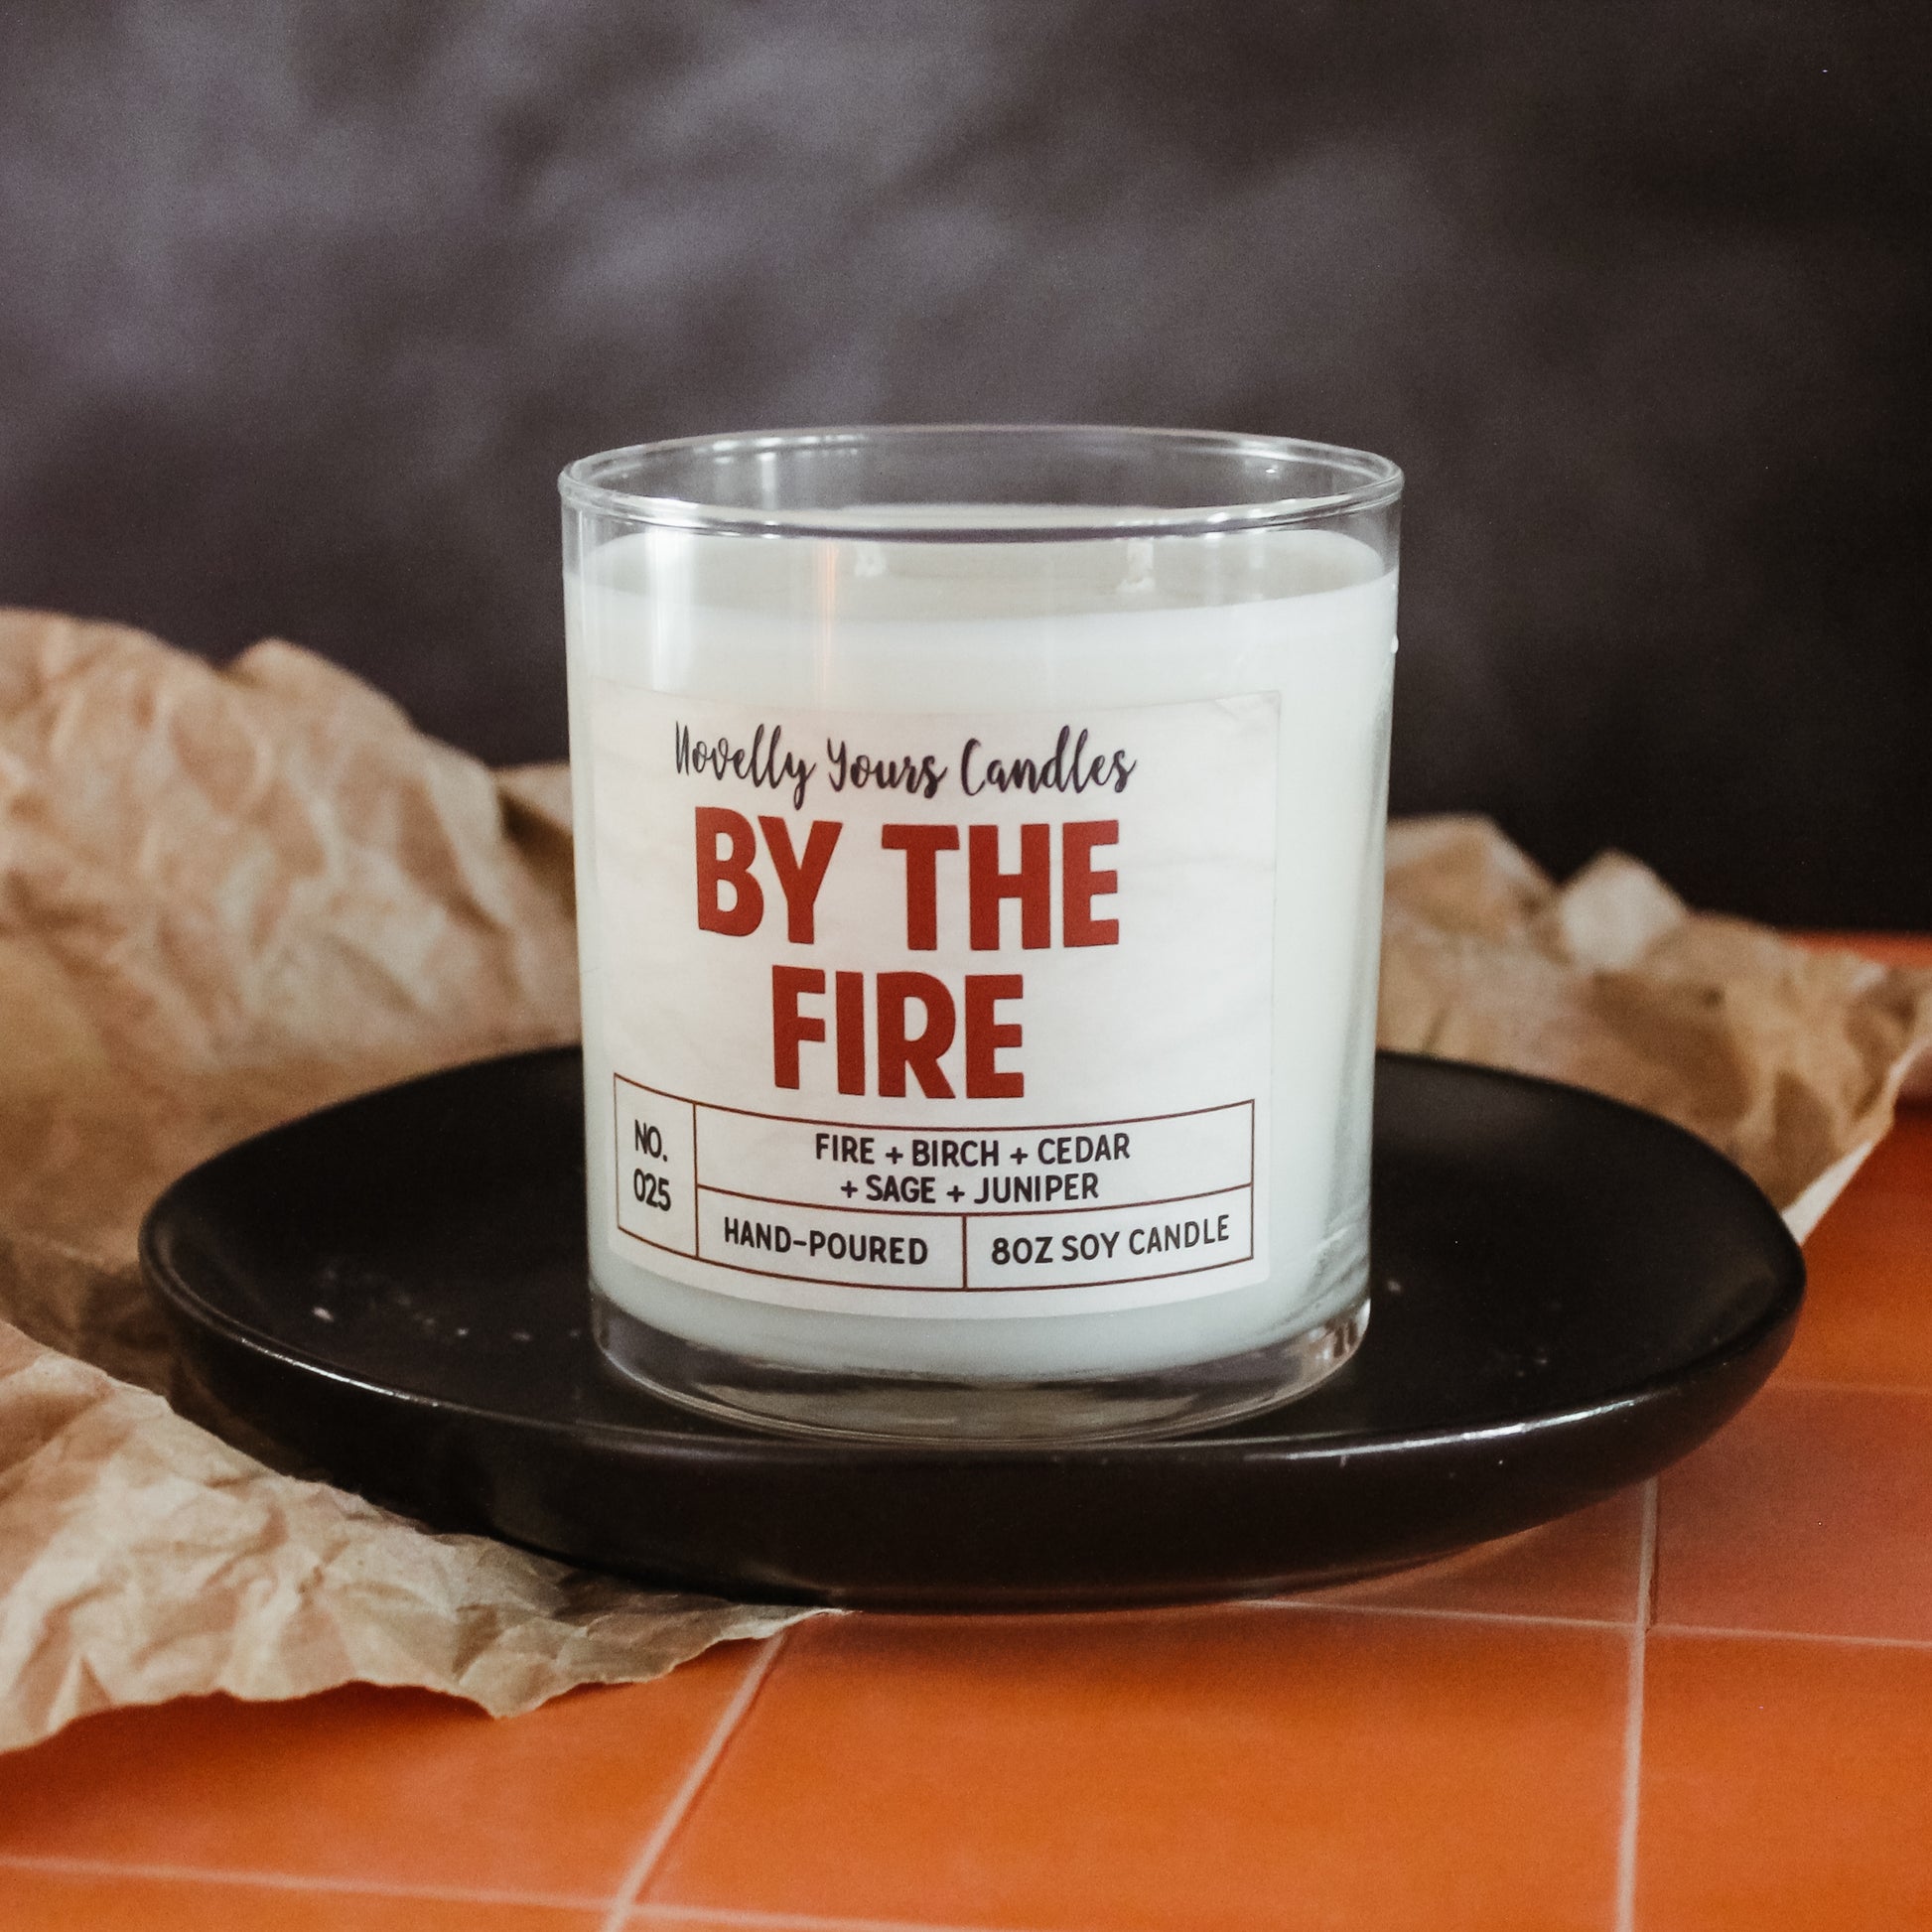 by the fire scented soy wax candle in glass tumbler. sits on black plate on top of peach tile countertop